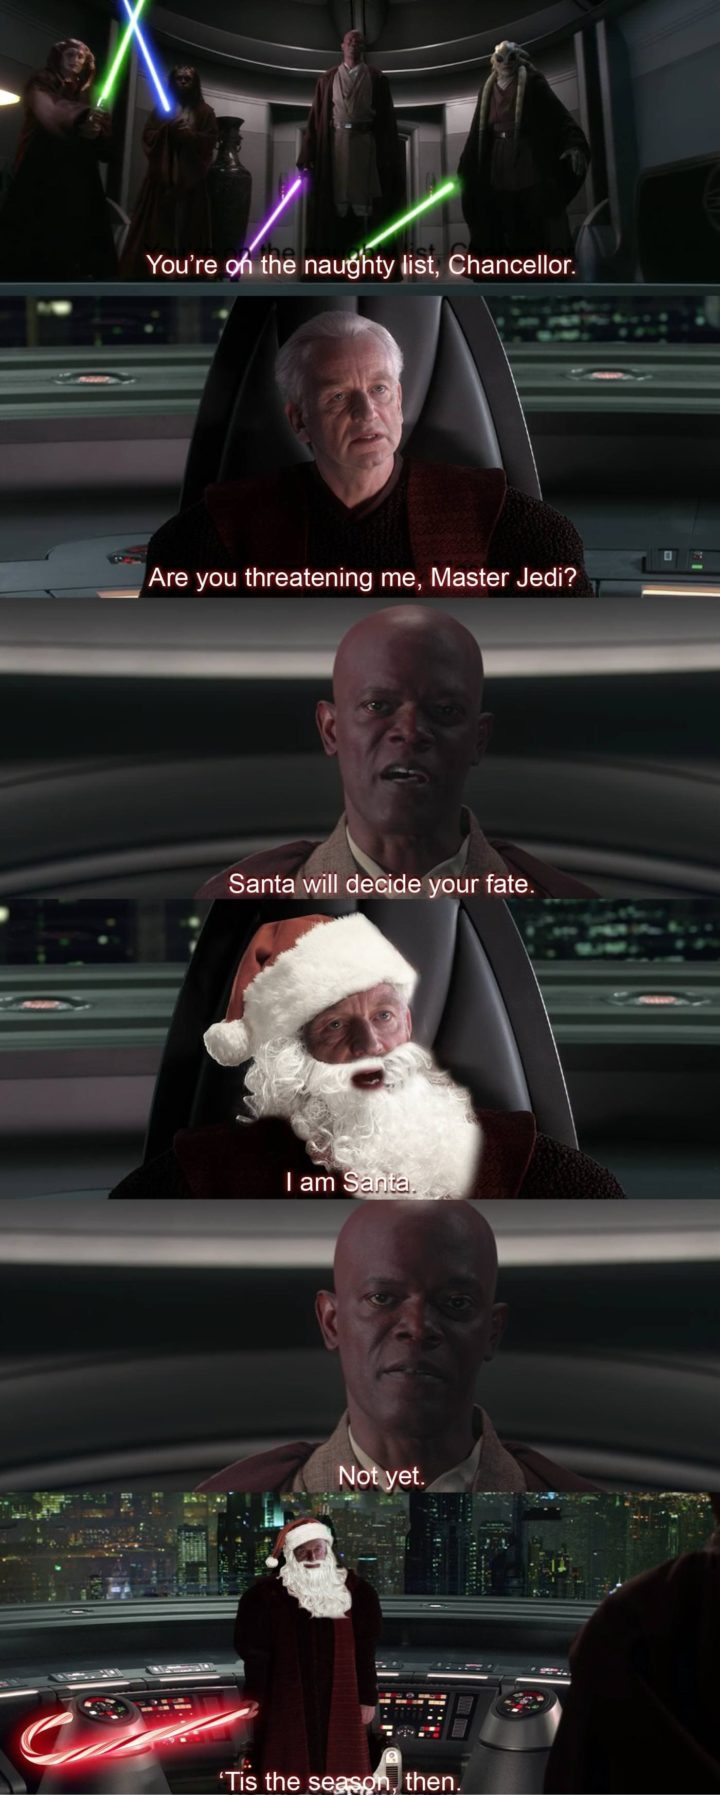 You’re on the naughty list Chancellor